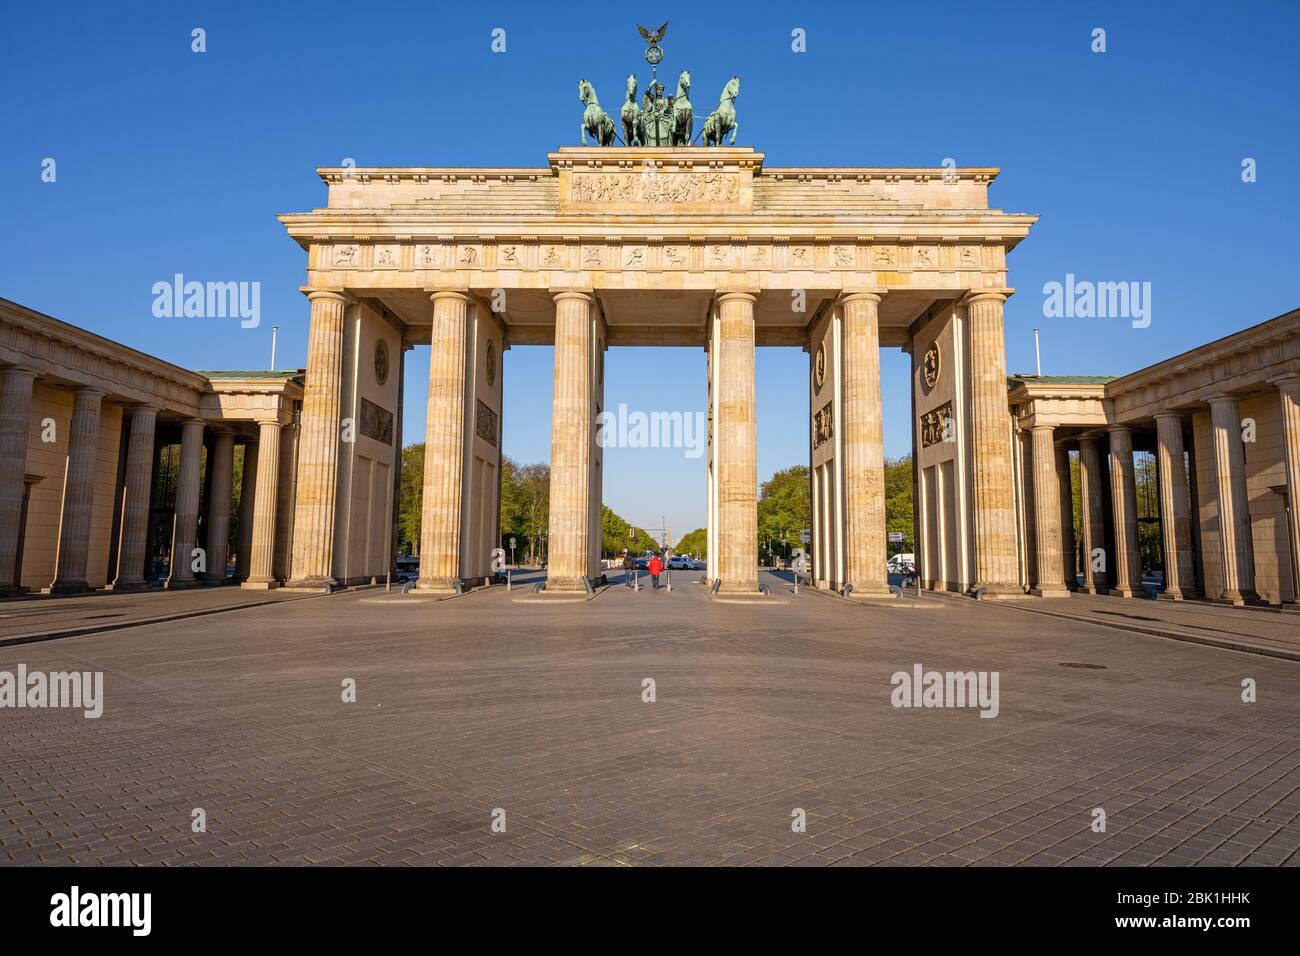 The famous Brandenburger Tor in Berlin with no people Stock Photo